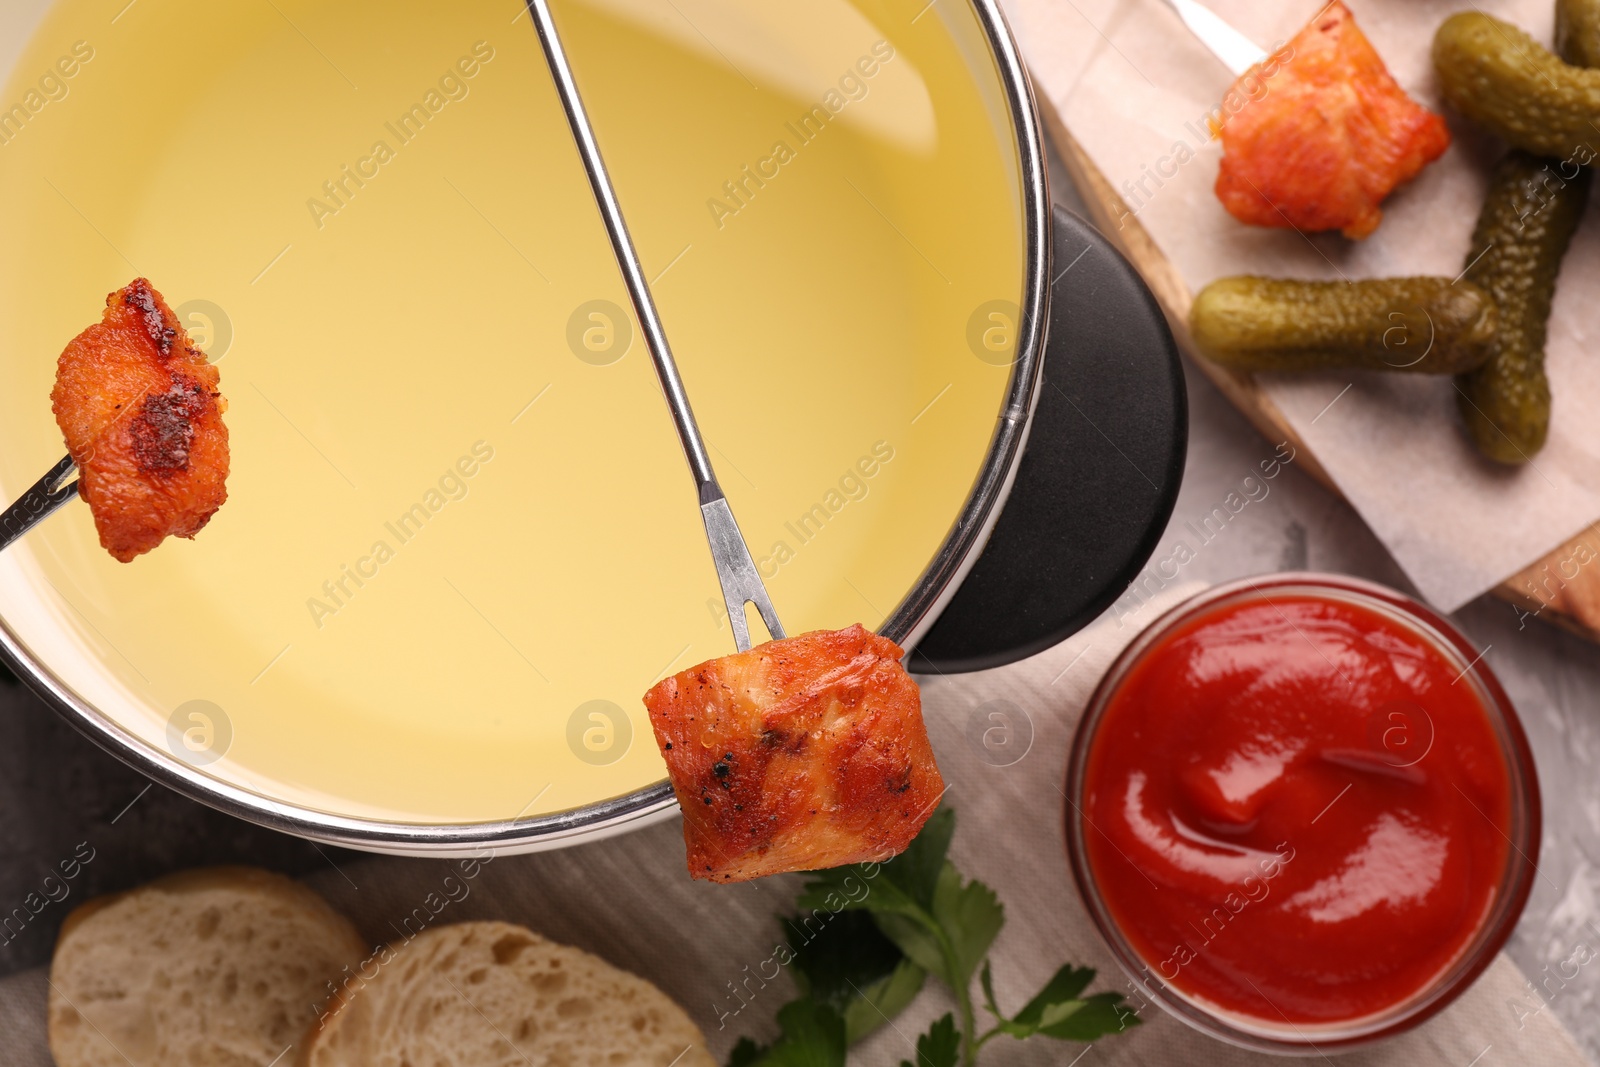 Photo of Fondue pot, forks with fried meat pieces, ketchup and other products on grey textured table, flat lay